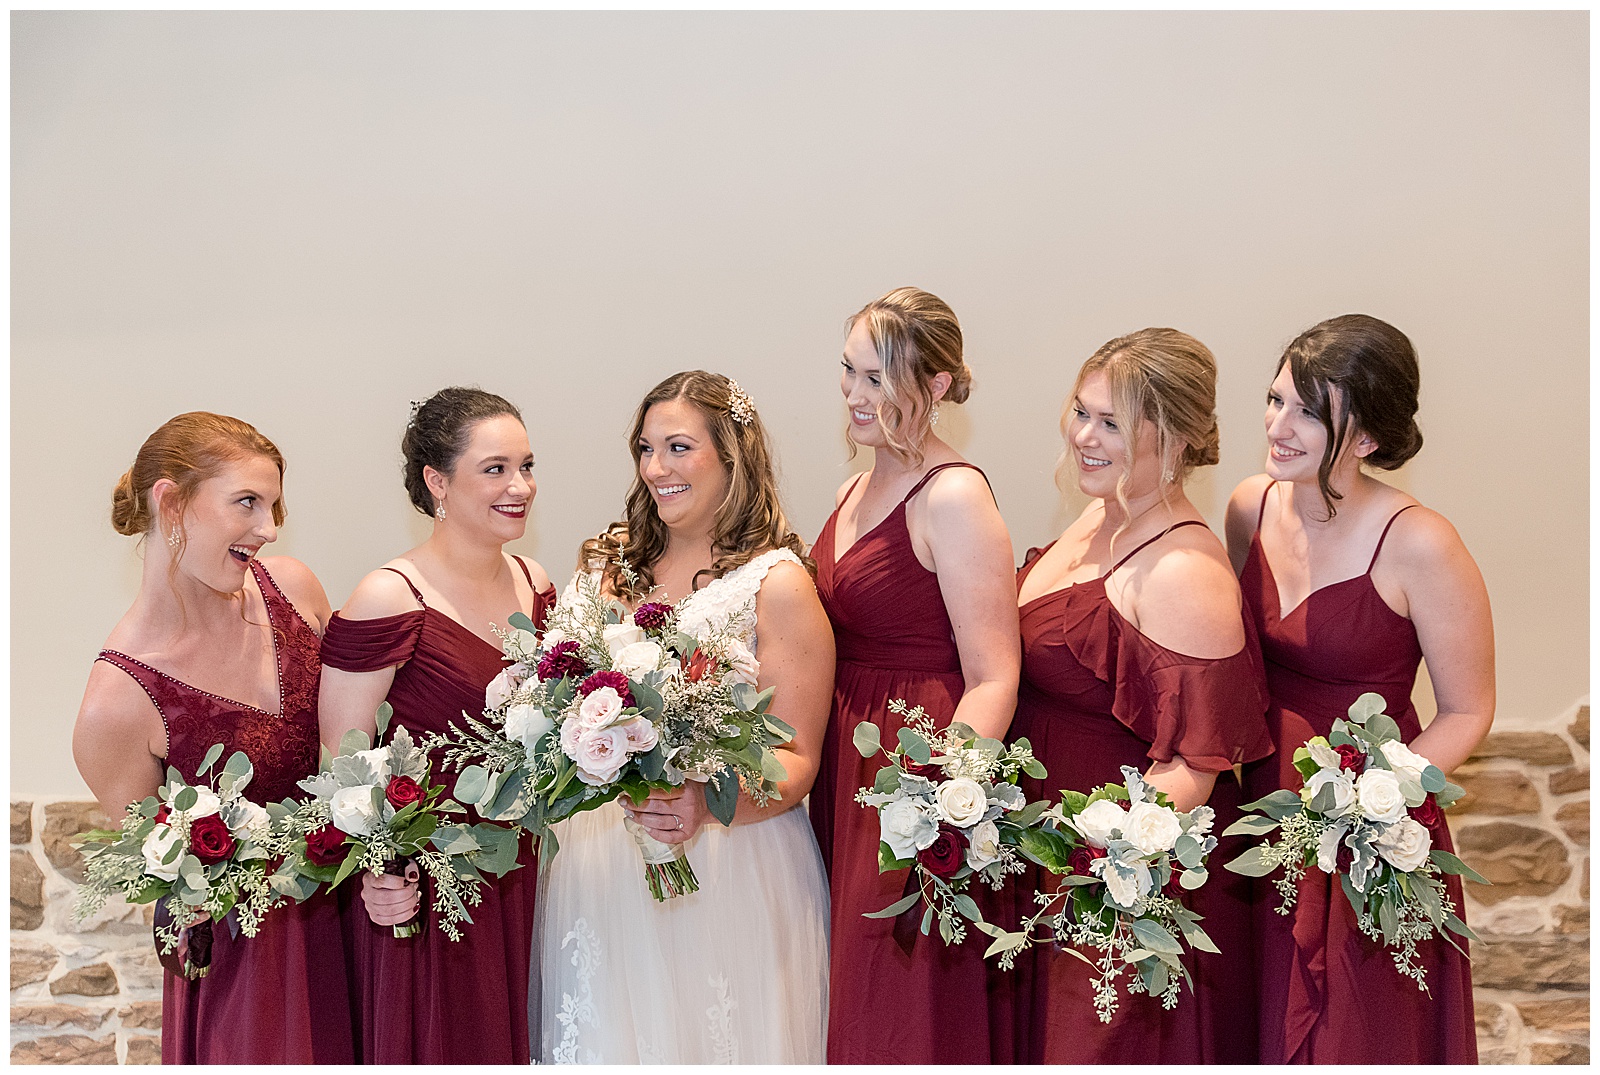 bride with her bridesmaids standing close together all smiling at the bride and holding red and white bouquets at folino estate